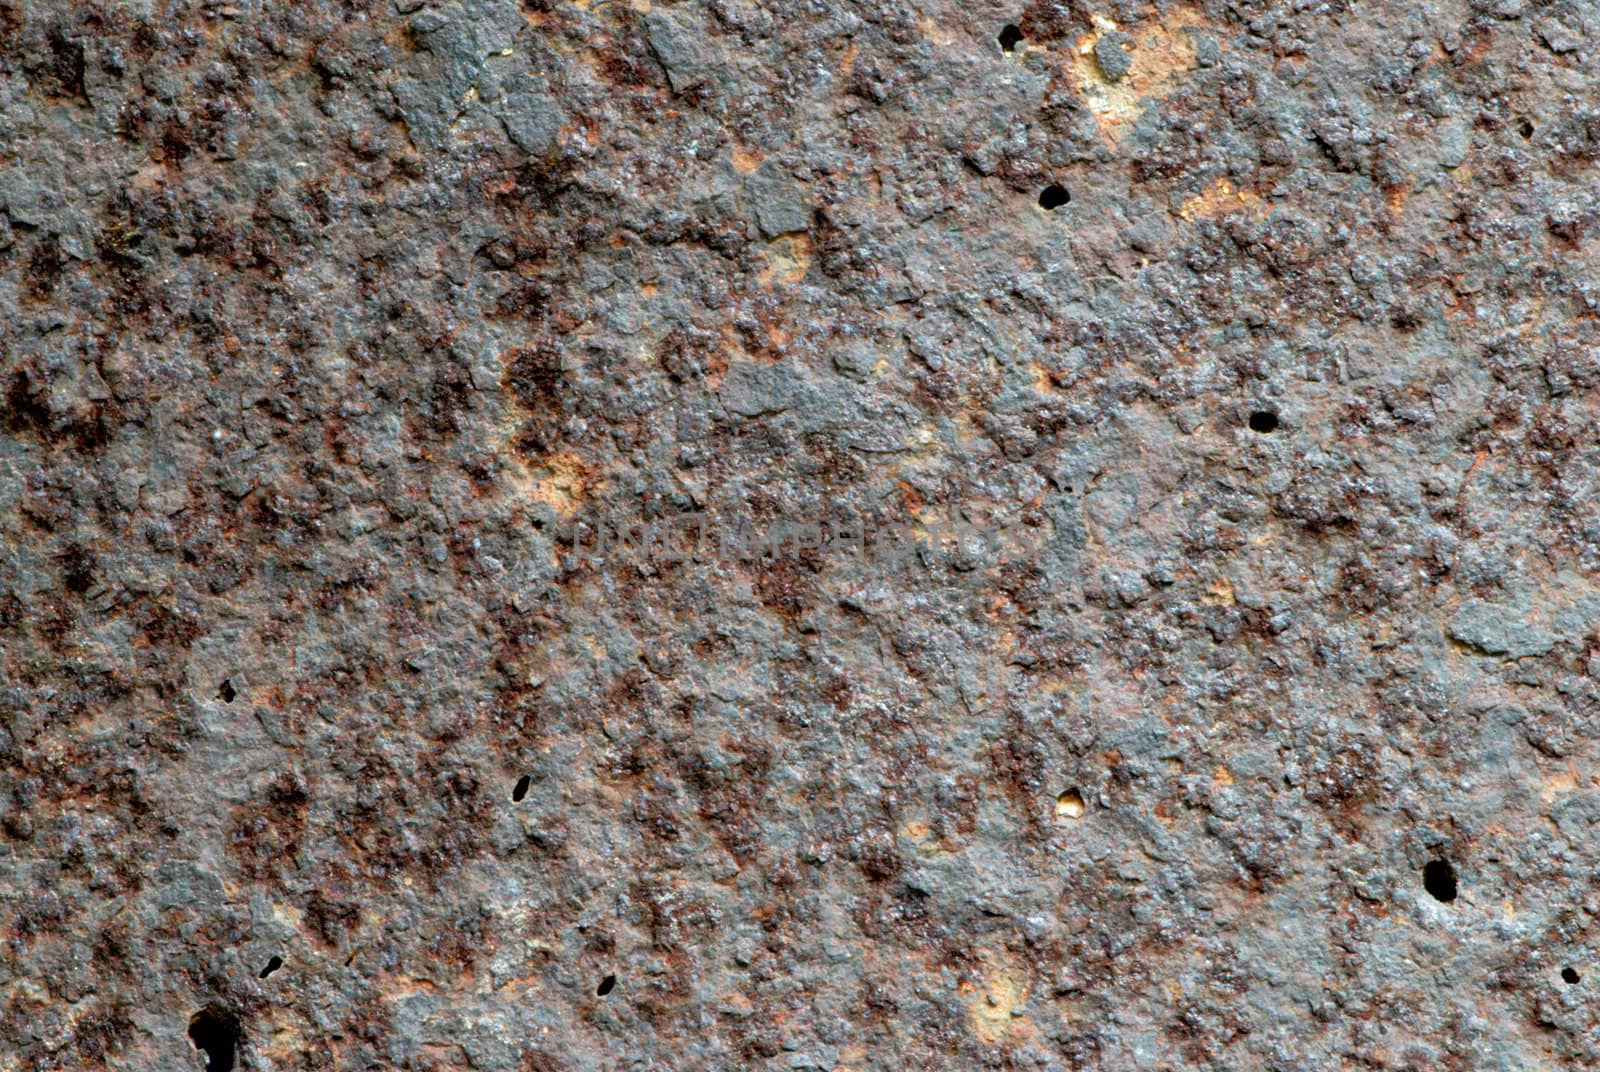 Close up of patterns and texture on bark